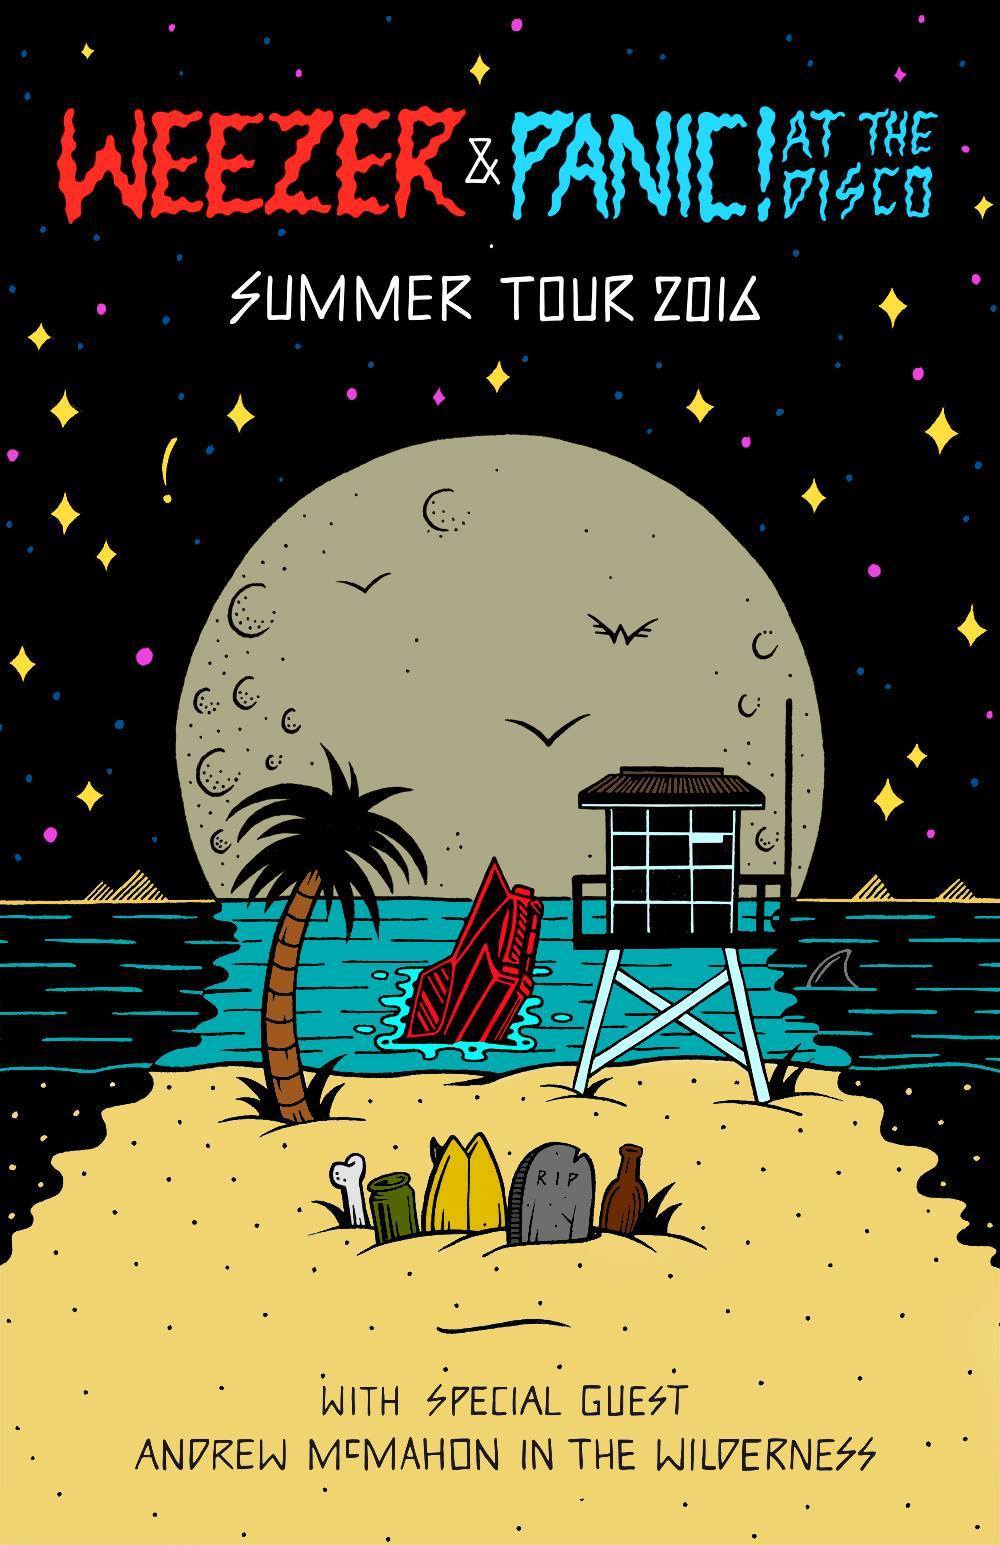 Get Your Tickets For The Weezer and Panic! At The Disco Summer Tour 2016